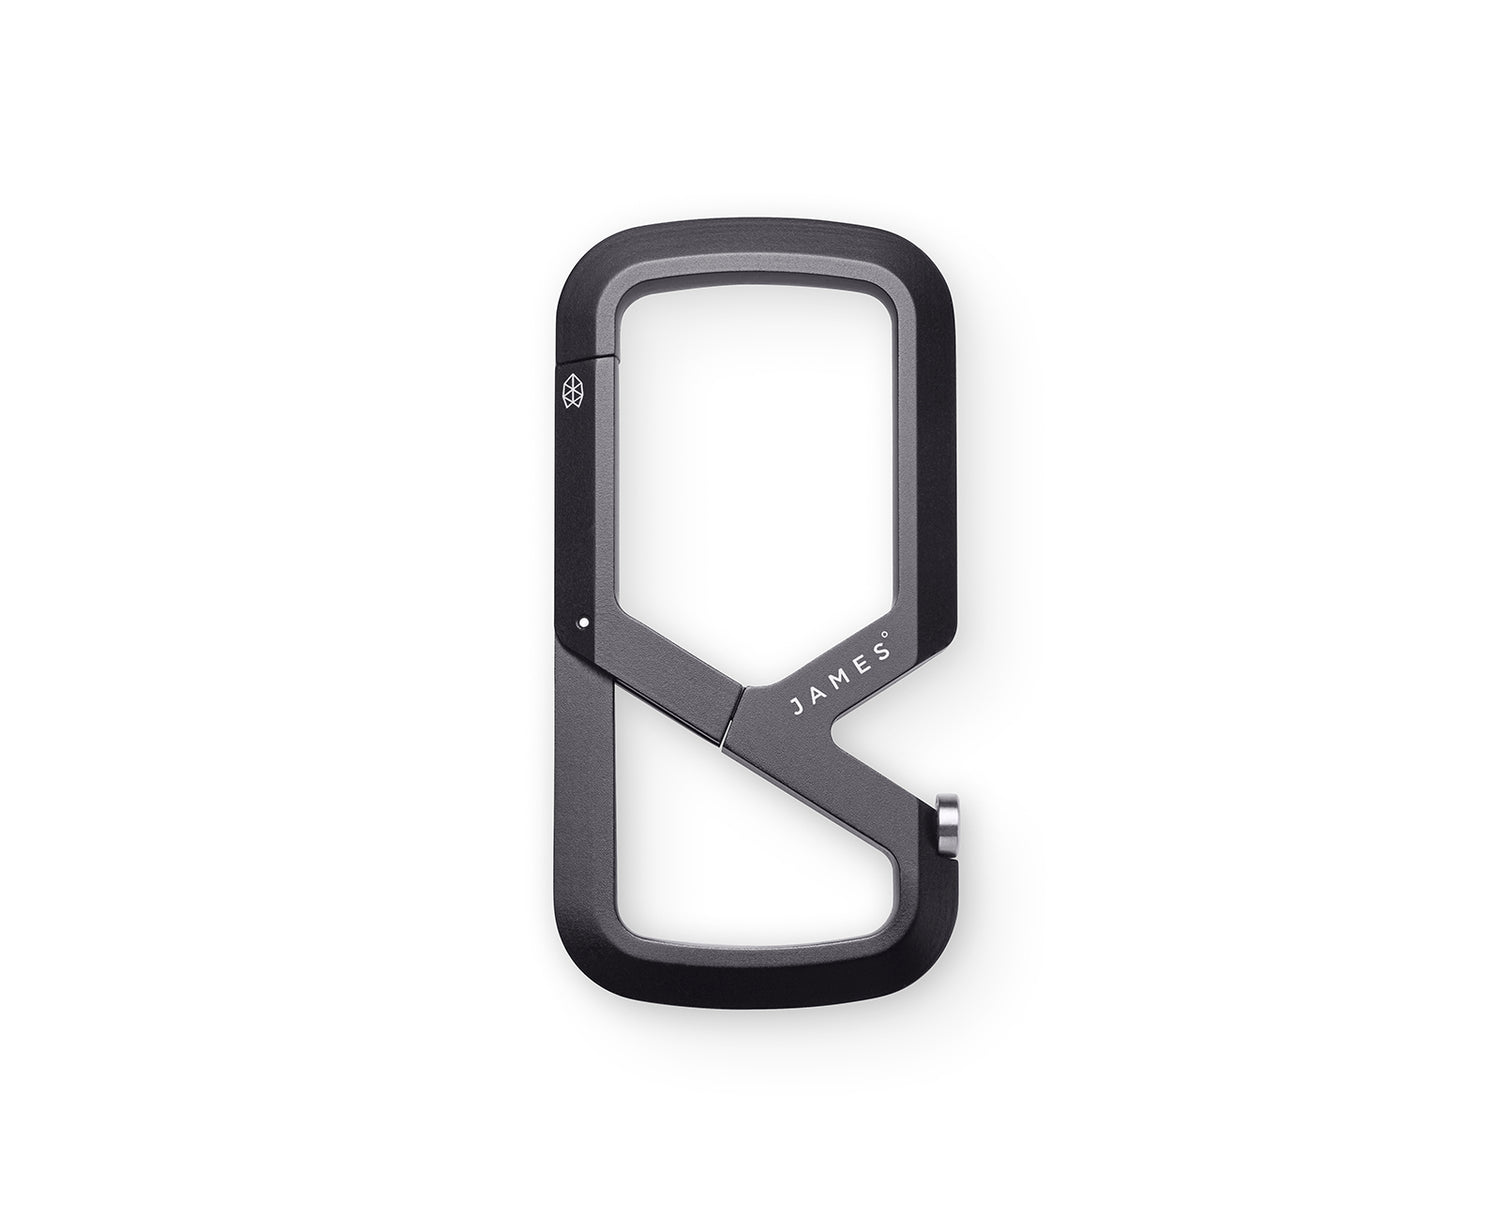 The Mehlville carabiner in space gray